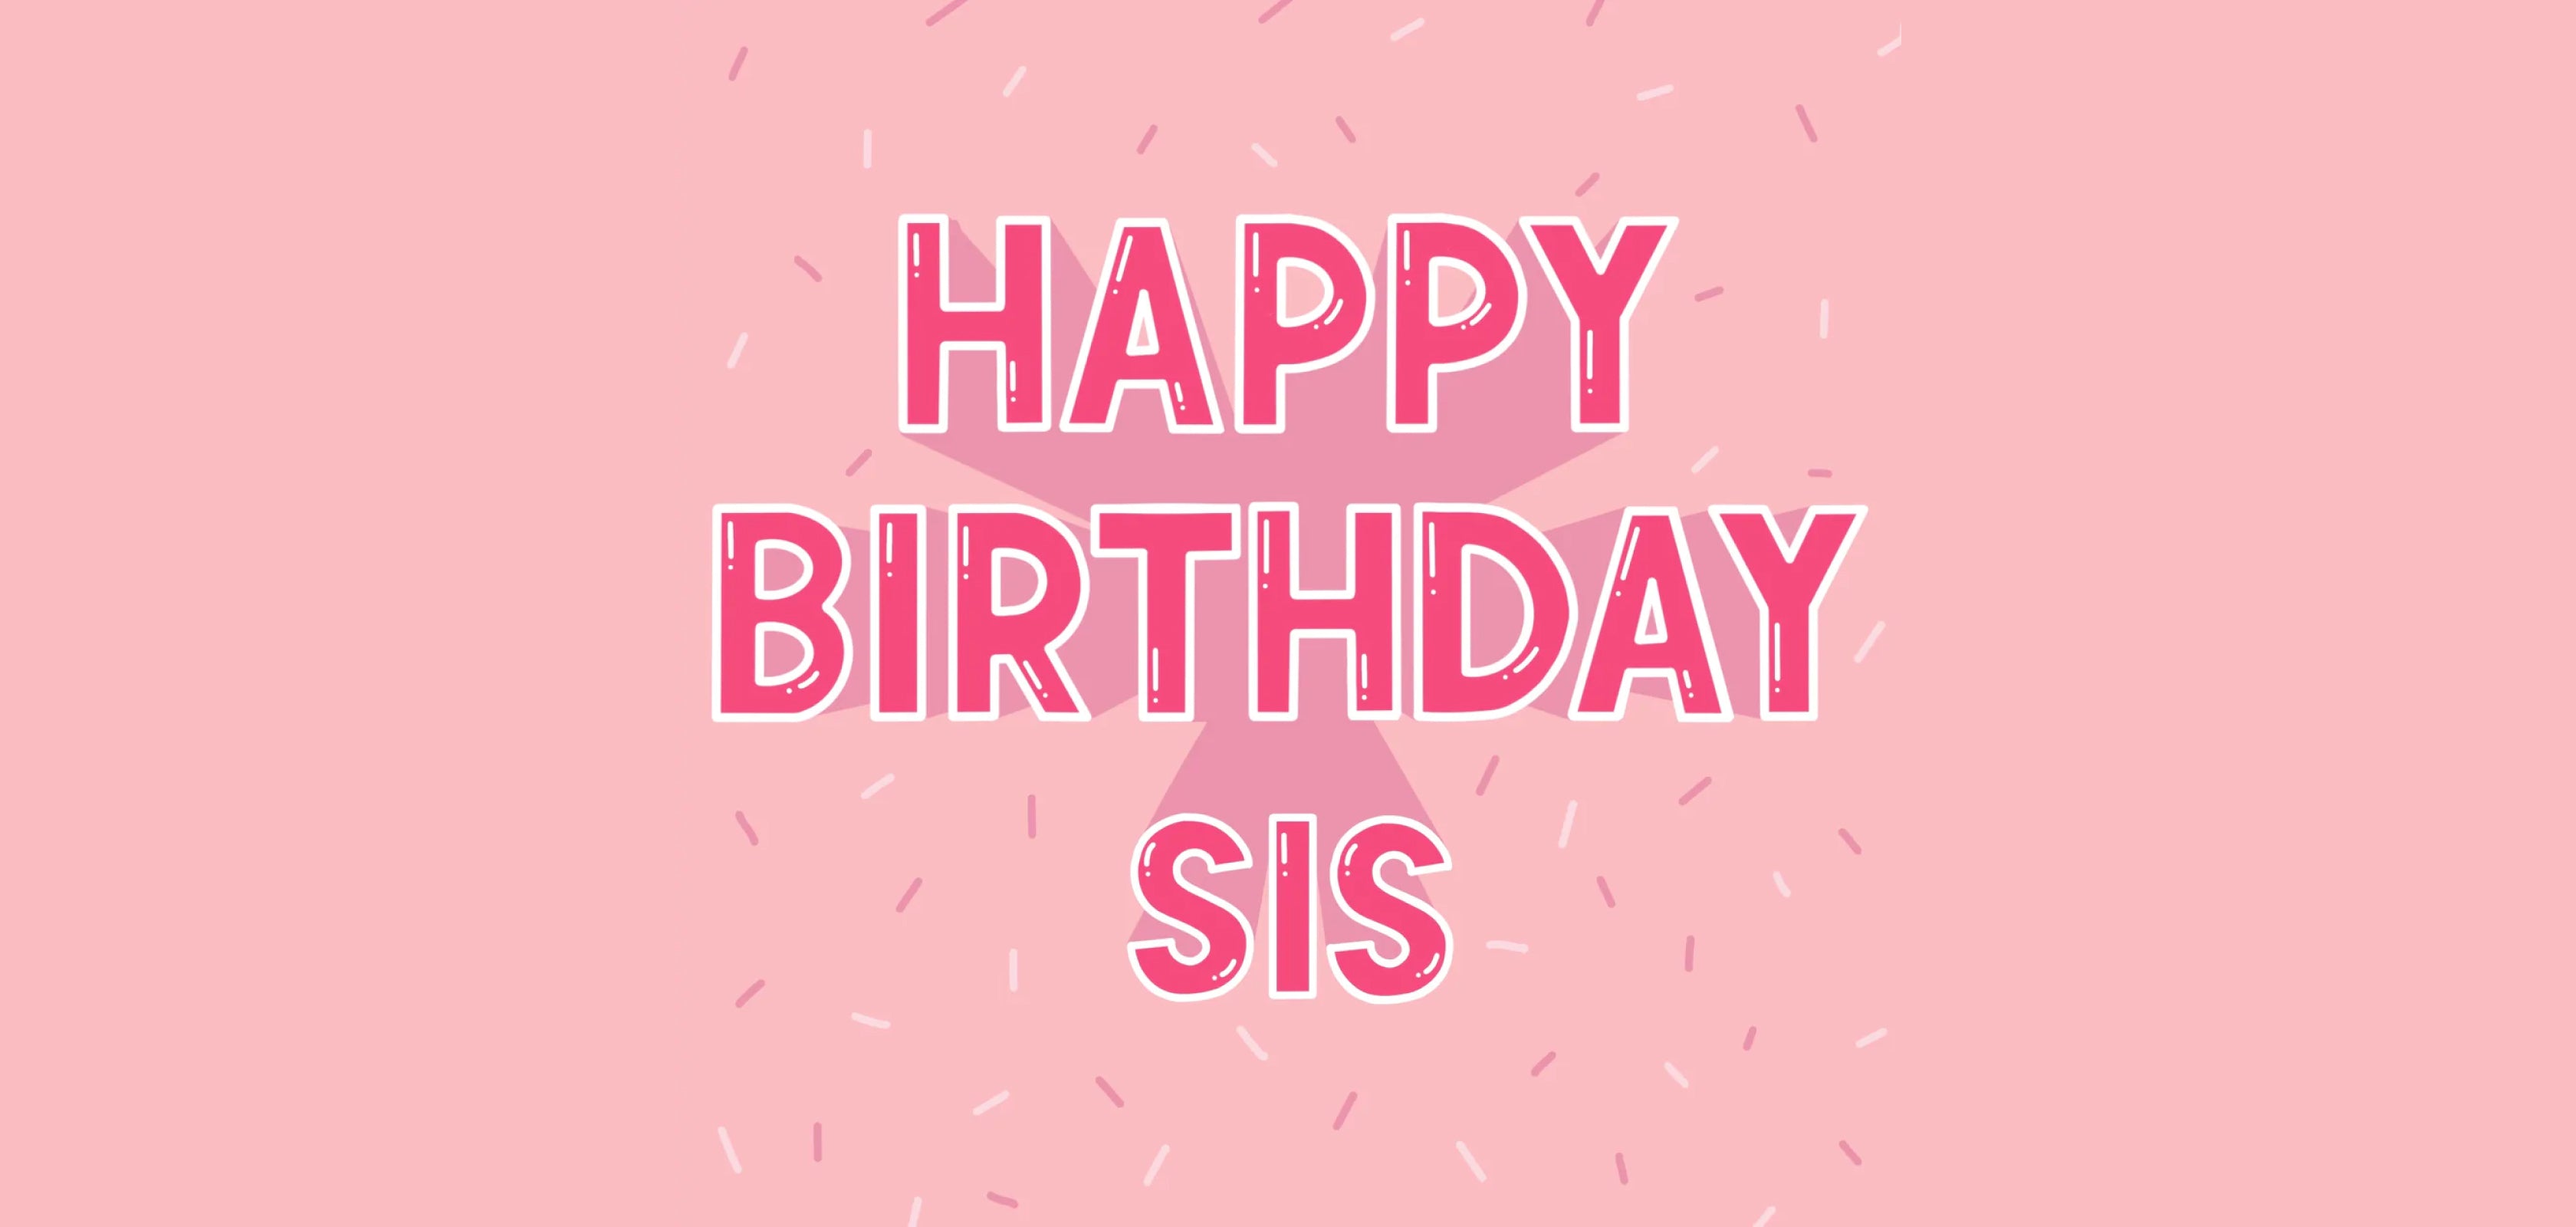 birthday images for sister